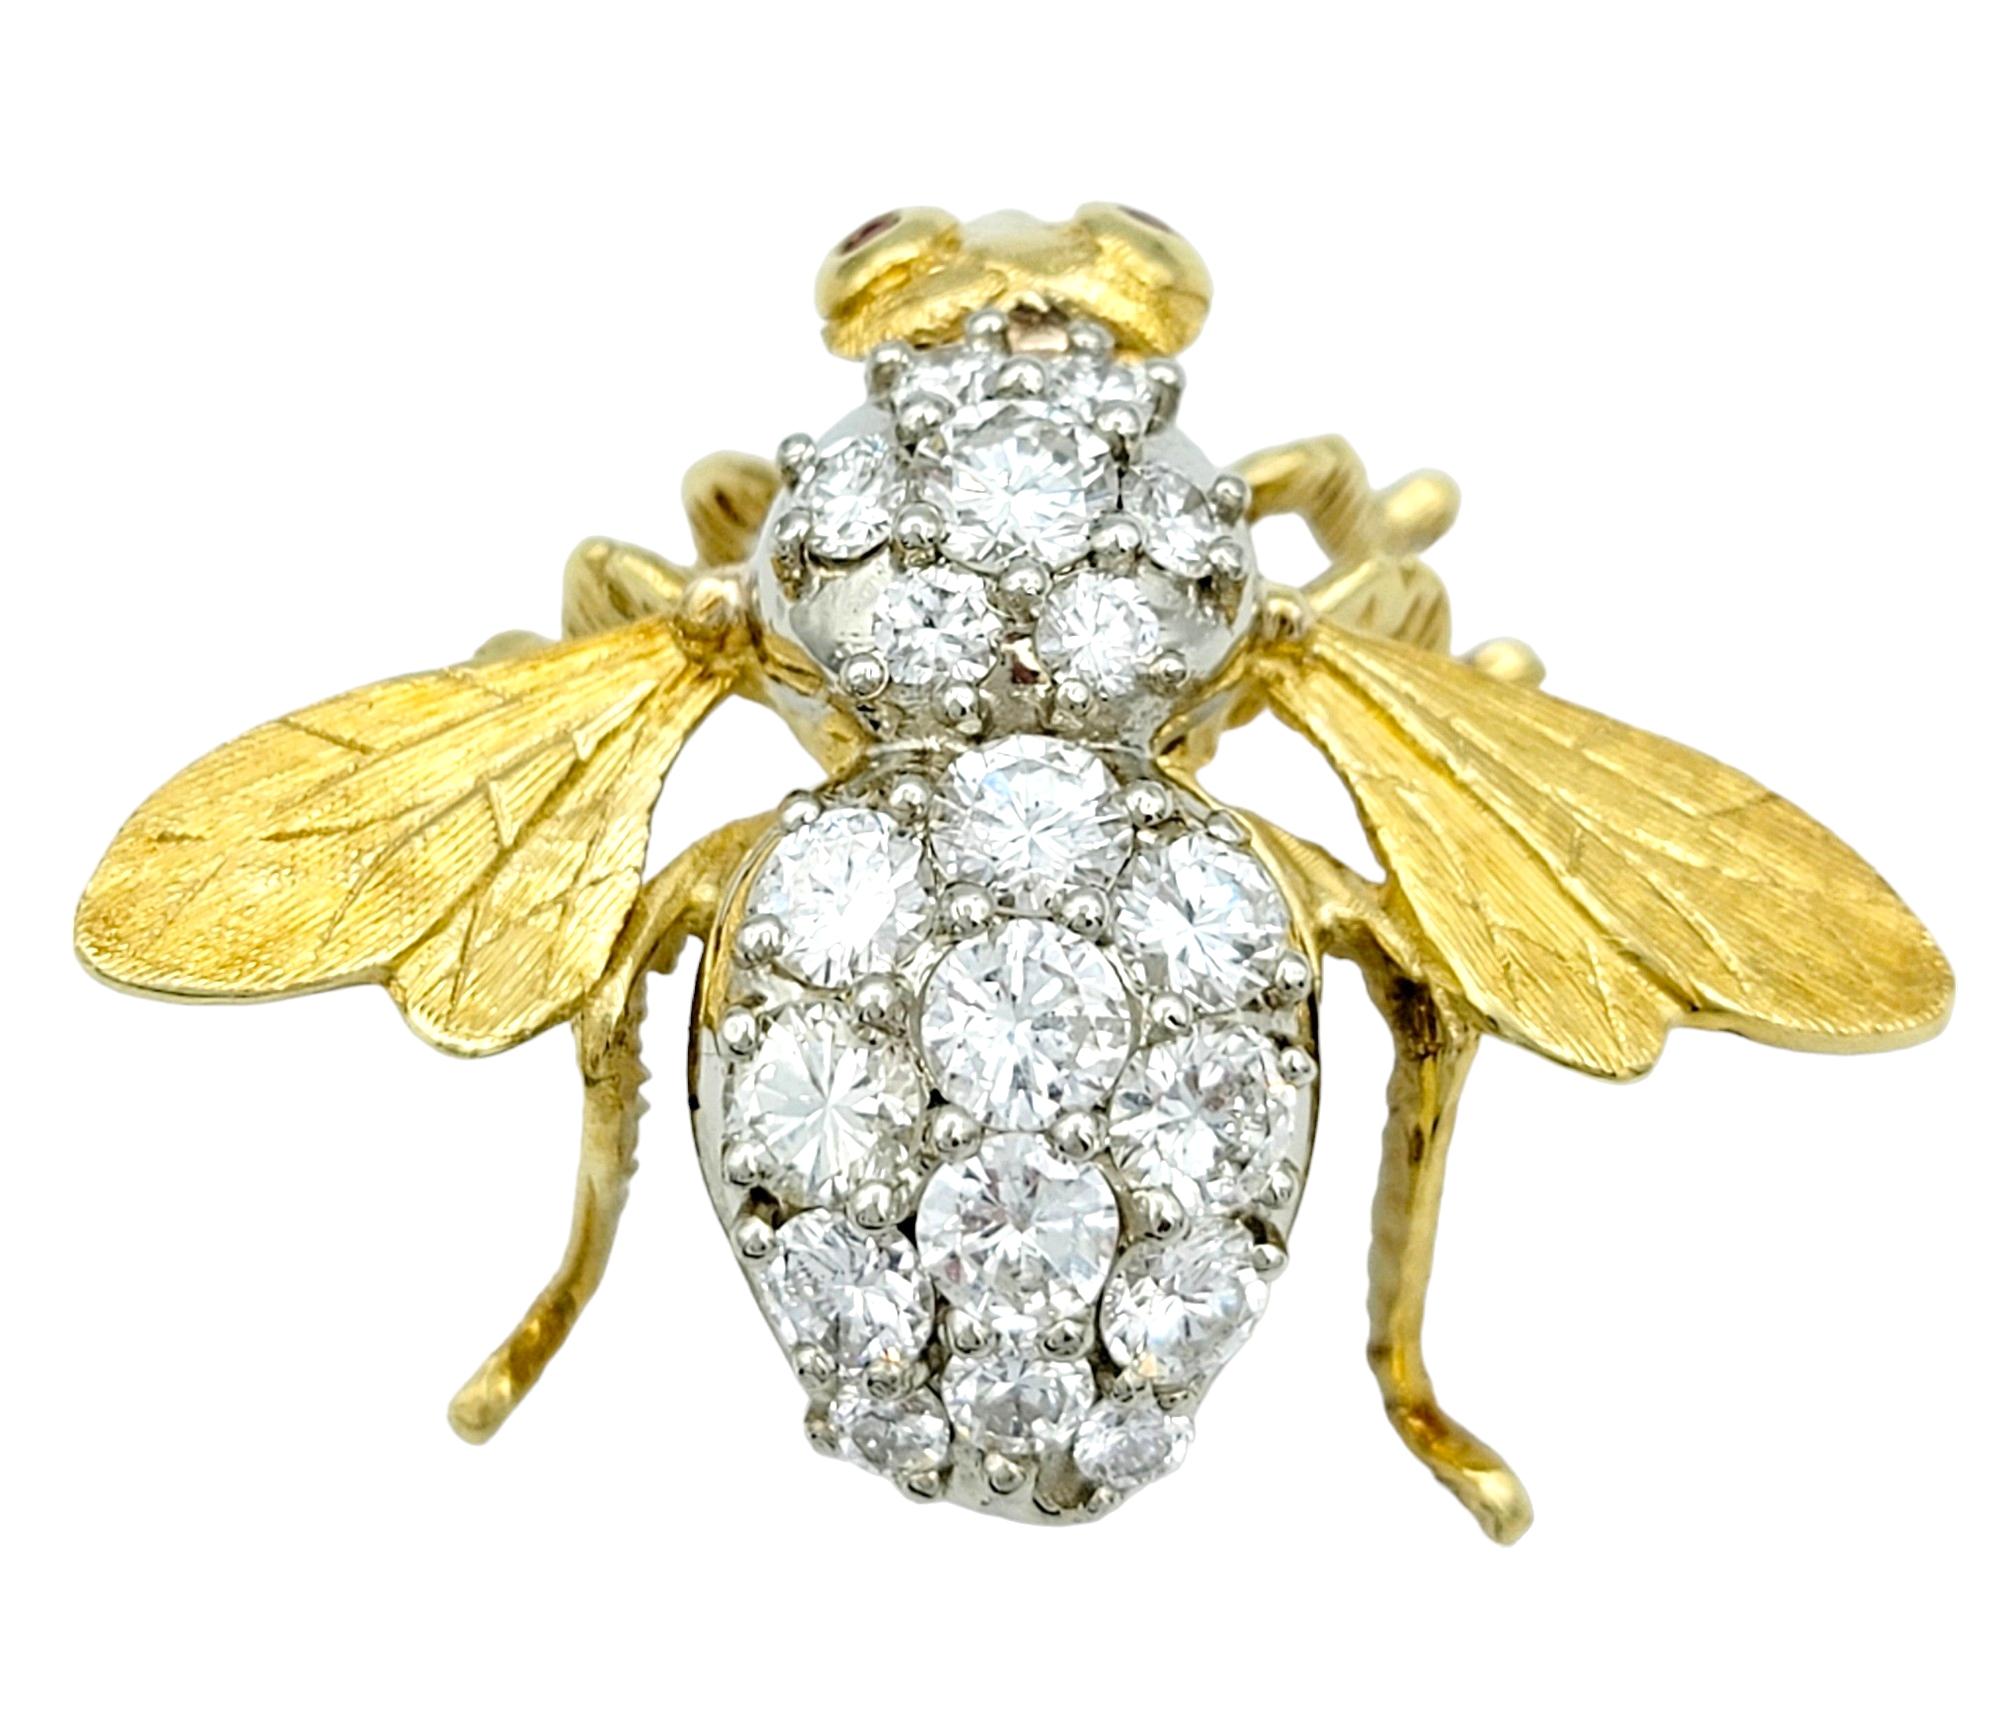 This captivating brooch by Herbert Rosenthal is a testament to exquisite craftsmanship and refined design. Crafted from luxurious 18 karat yellow gold, the brooch takes the form of a graceful bee, adorned with a spectacular array of diamonds. The